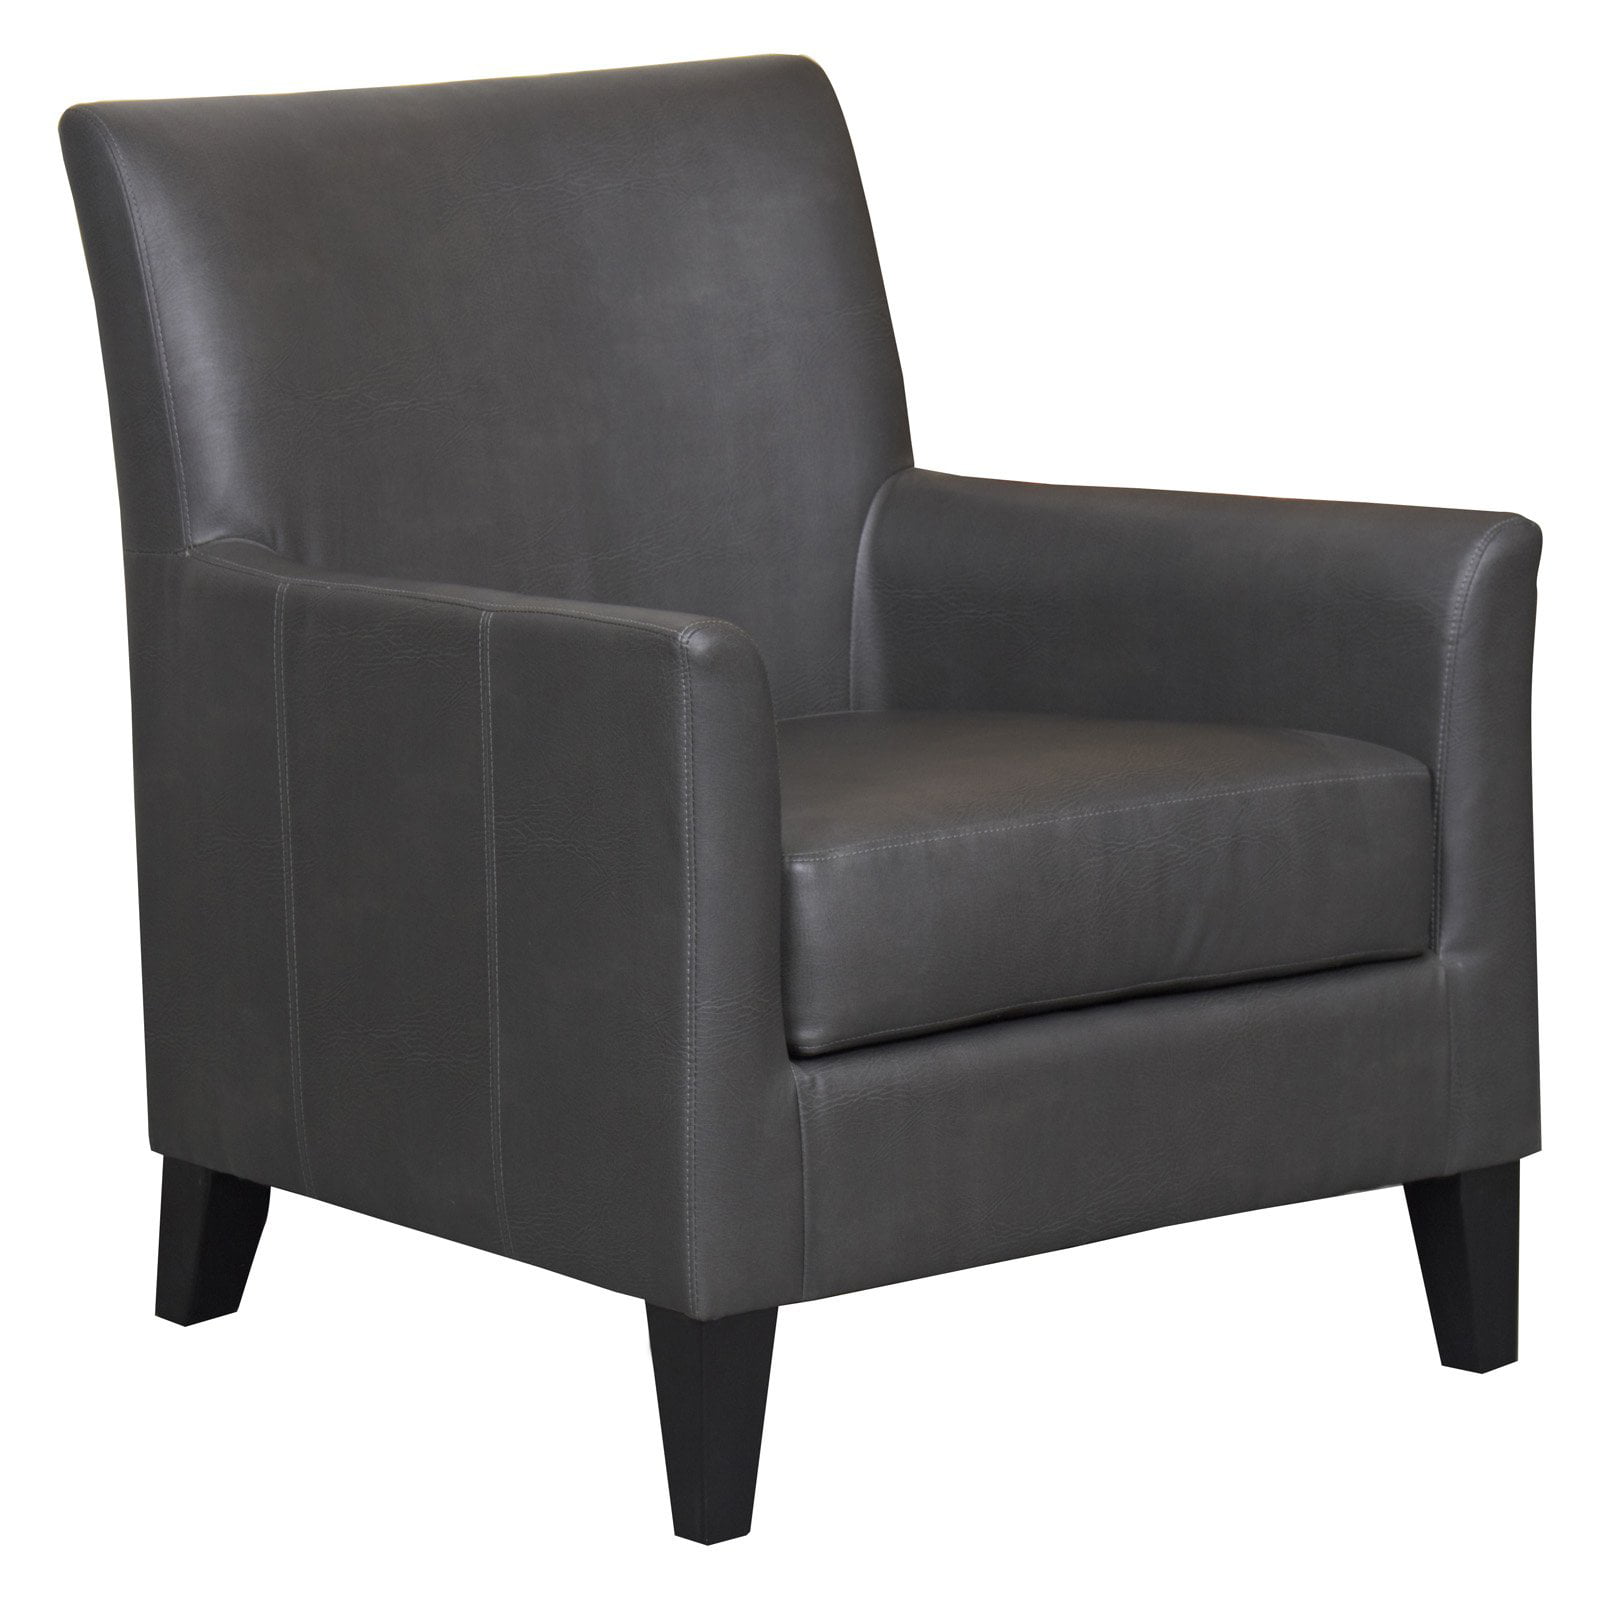 !nspire Gray Faux Leather Accent Chair